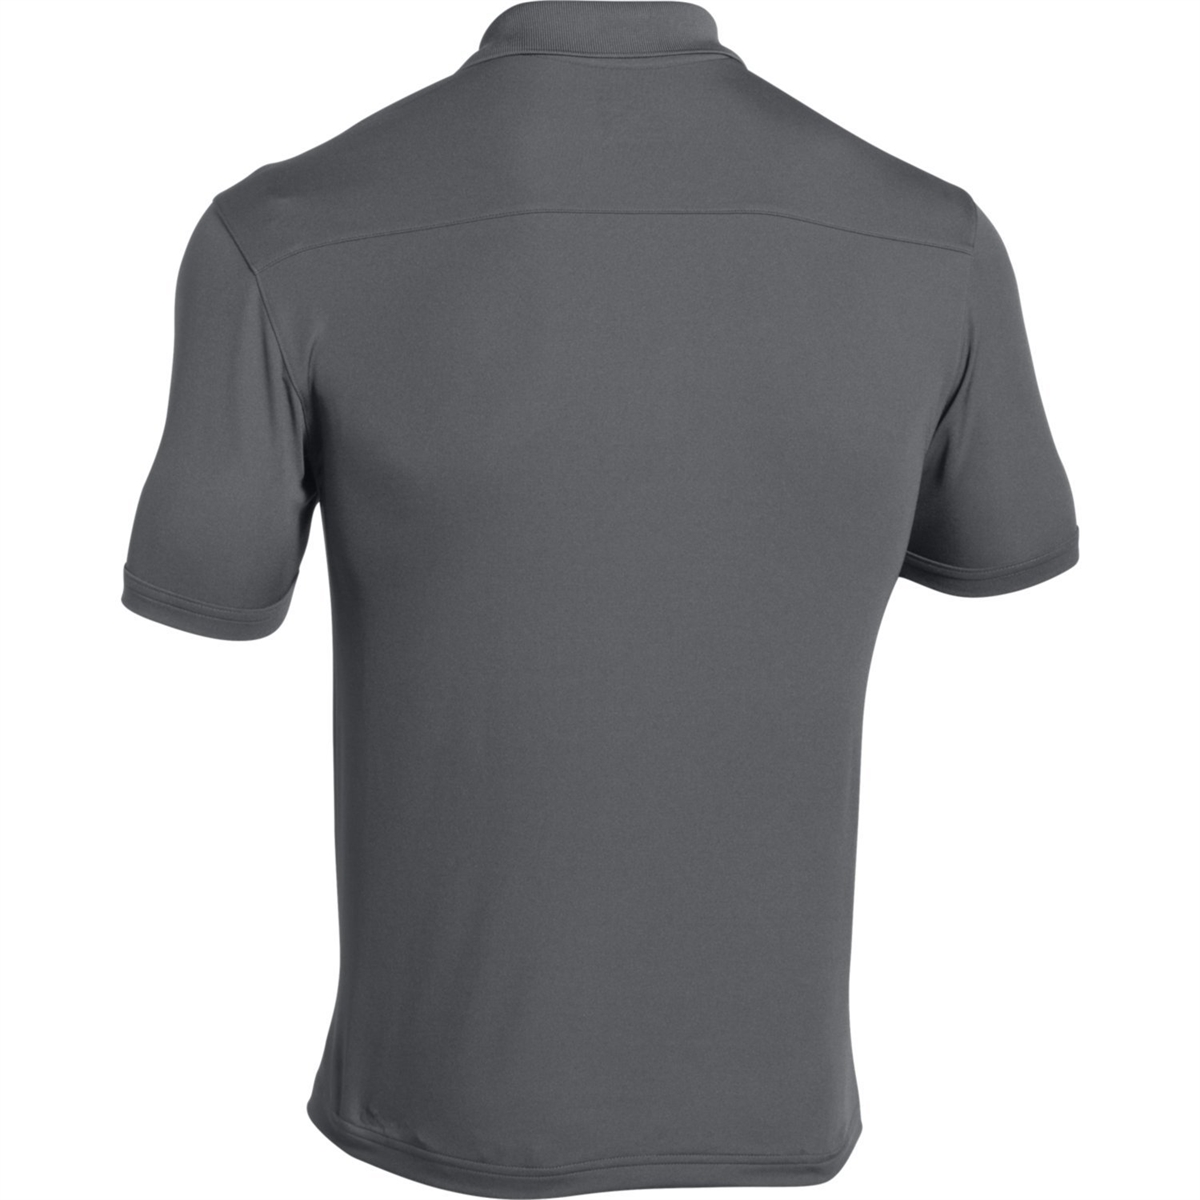 Under Armour Men's Team Armour Polo - image 2 of 2